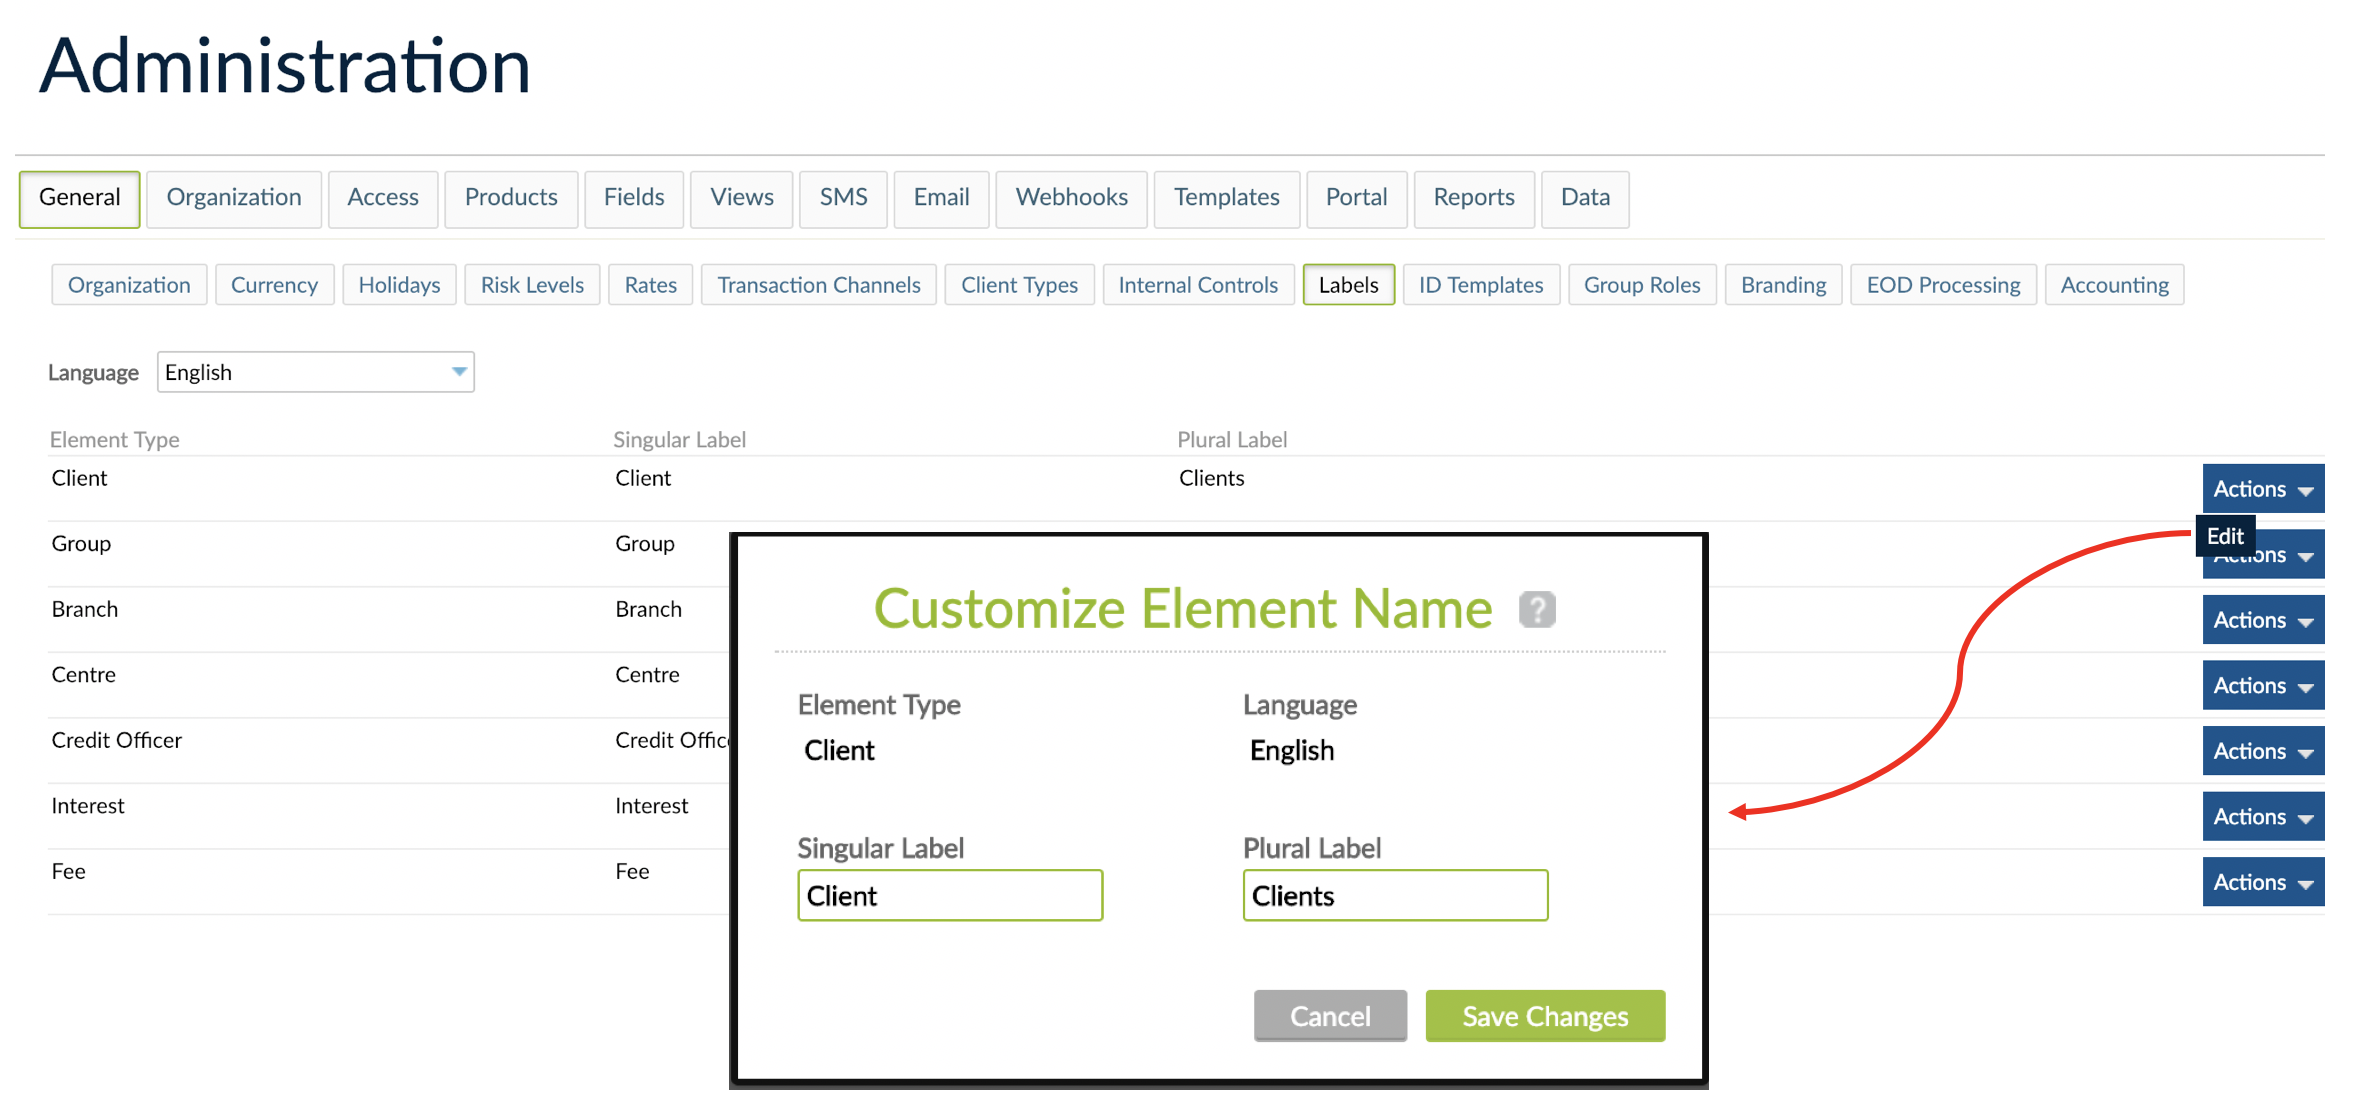 Labels view, where all defined labels are displayed. By clicking Actions button and Edit, the labels can be customized.